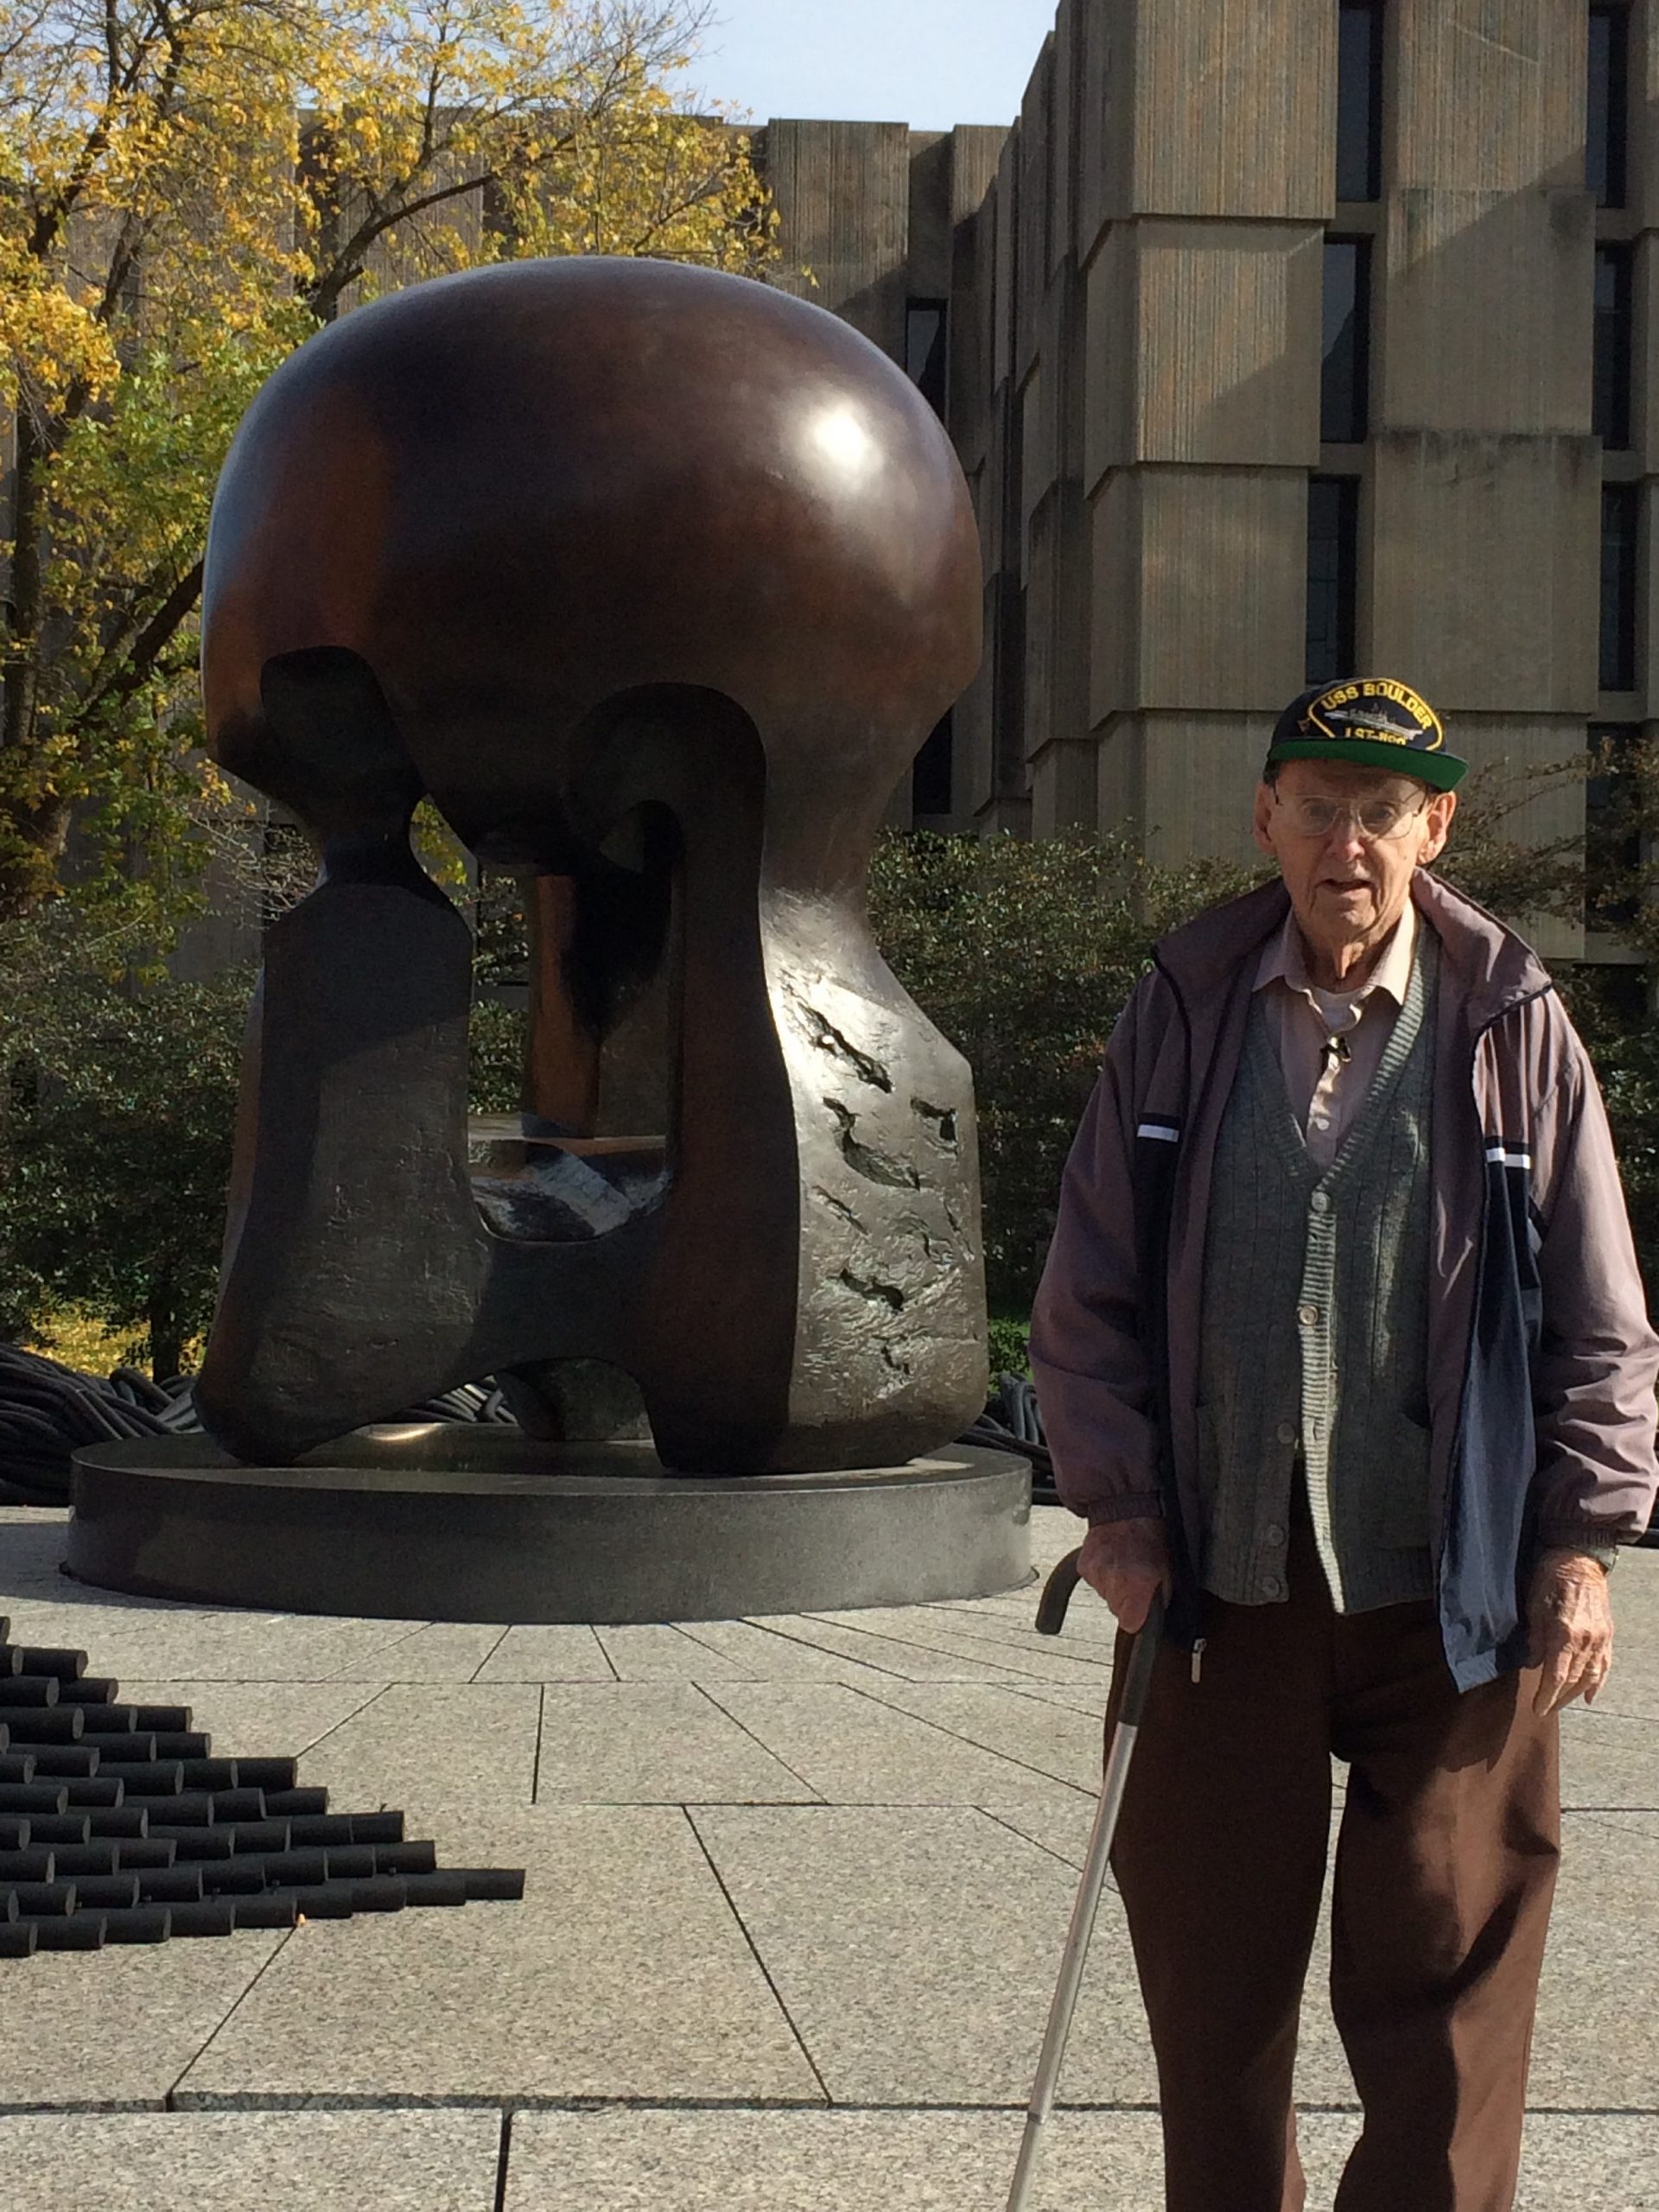 Ted Petry at the U of Chicago Monument to the Chicago Pile-1 scientists. Courtesy of Joseph Dowling.